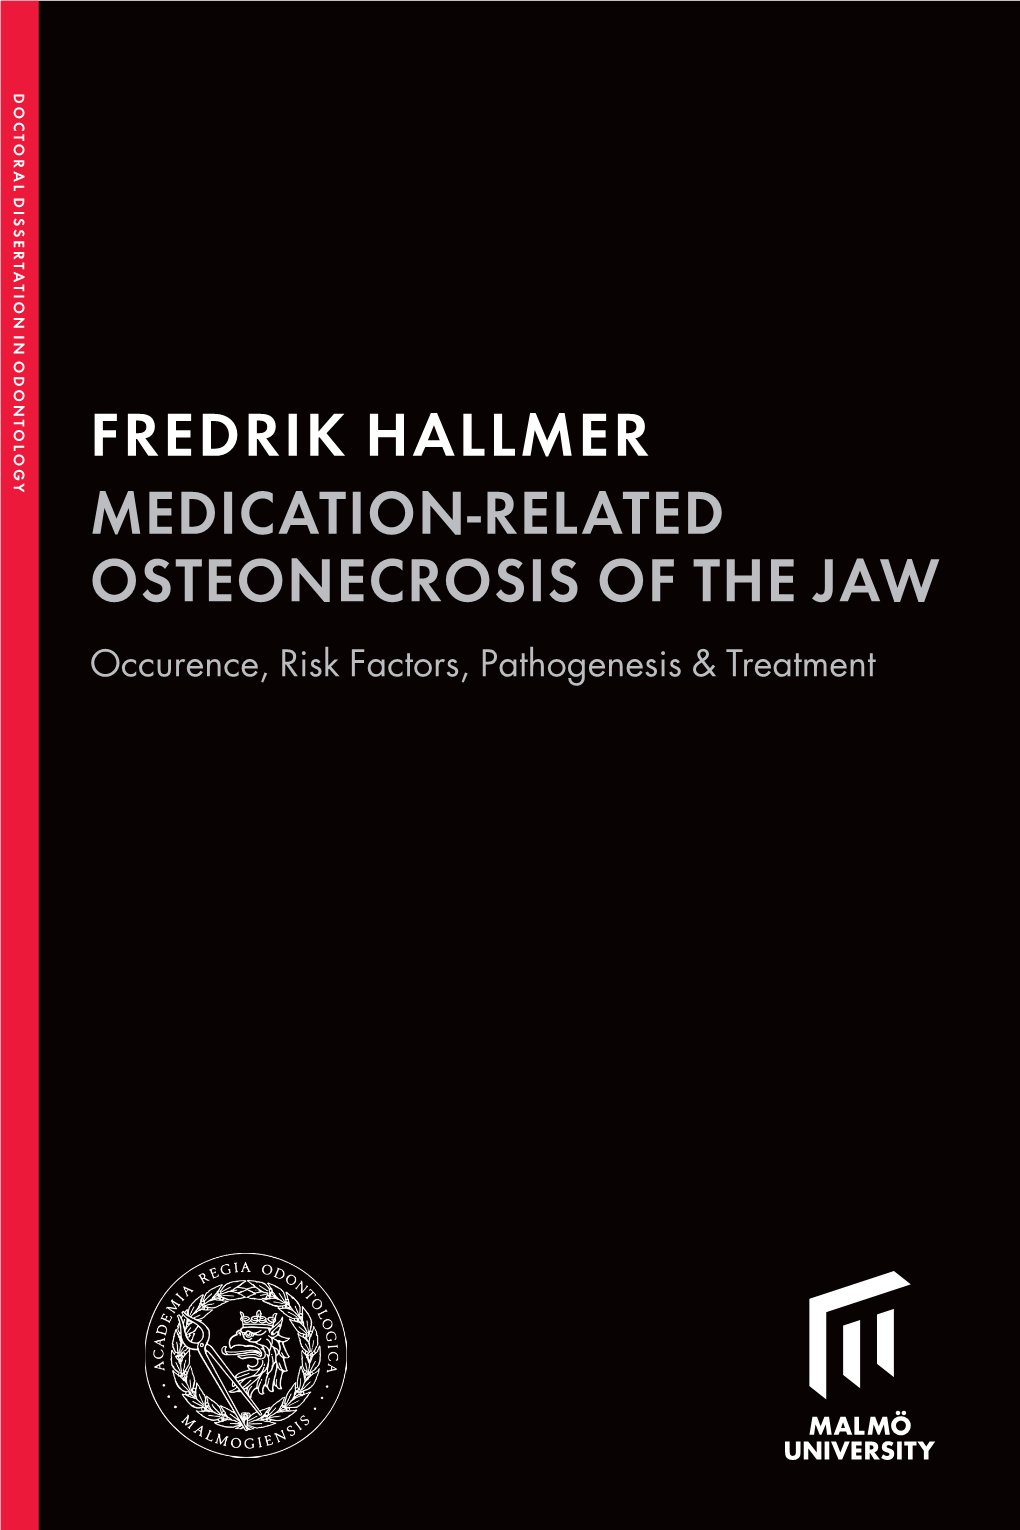 Fredrik Hallmer Medication-Related Osteonecrosis of the Jaw Malmö University 2019